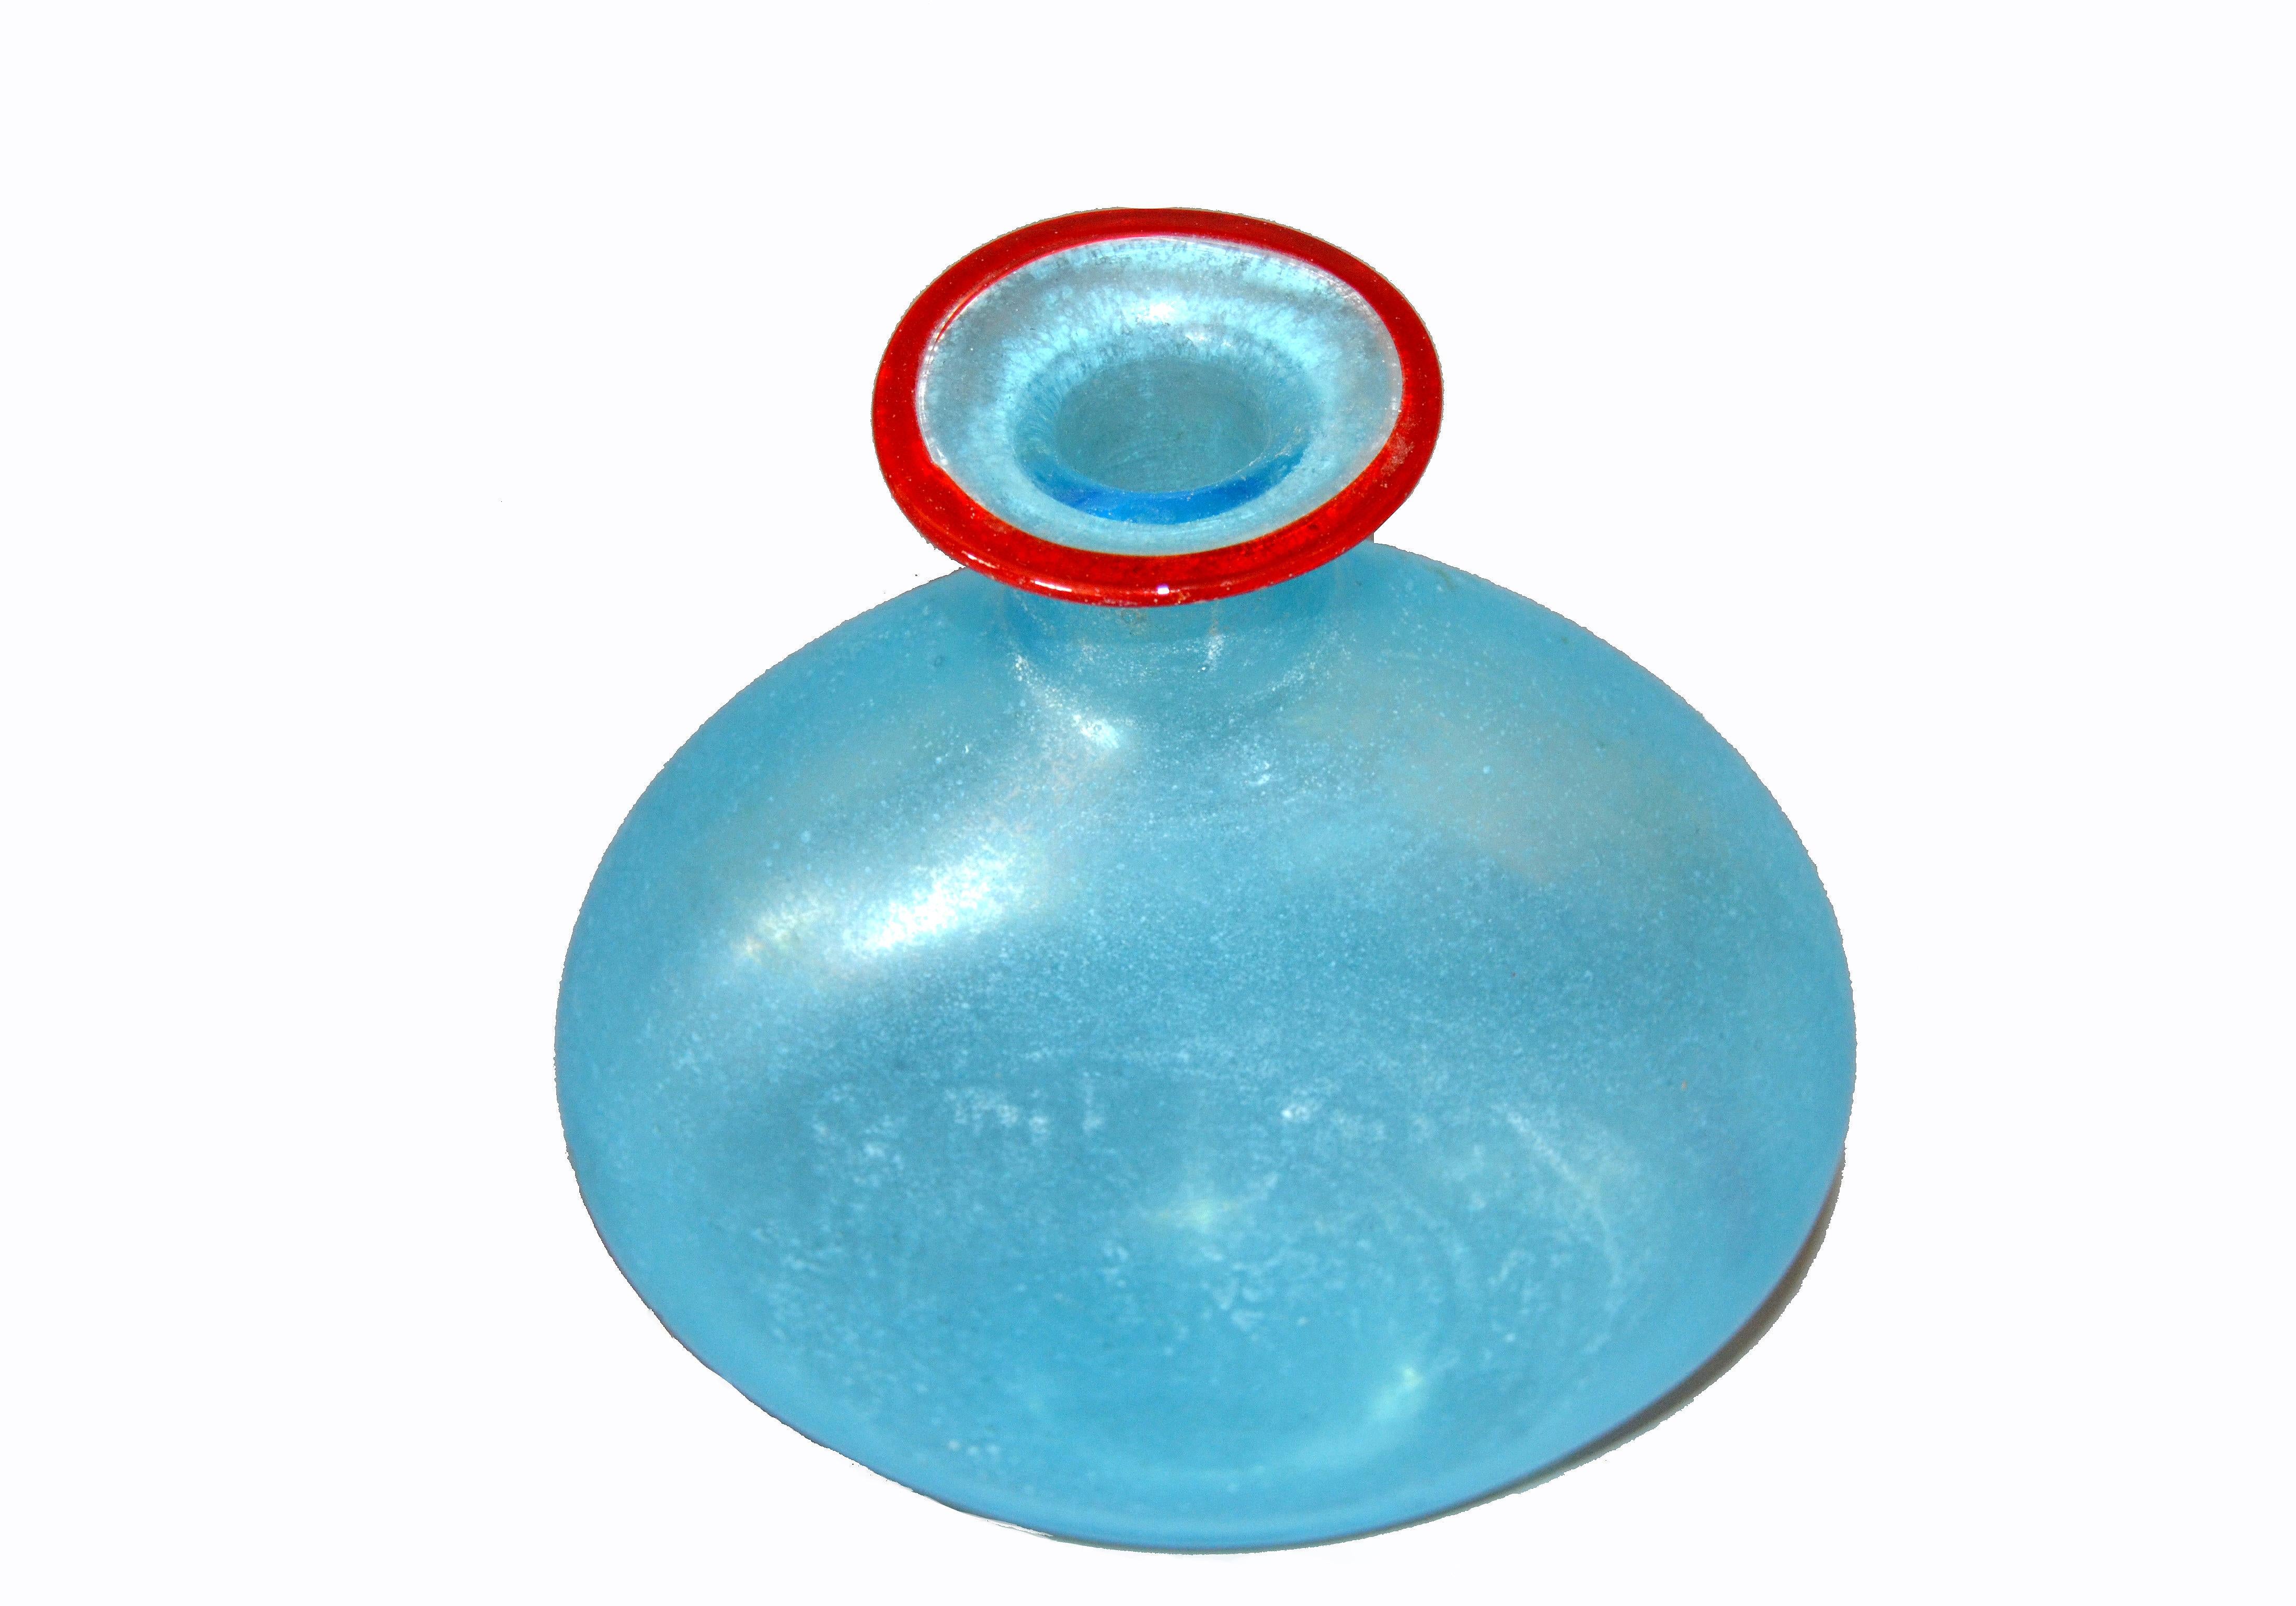 Venetian Blue Murano Art Glass Decanter, Vessel with Red Stopper, Italy 1